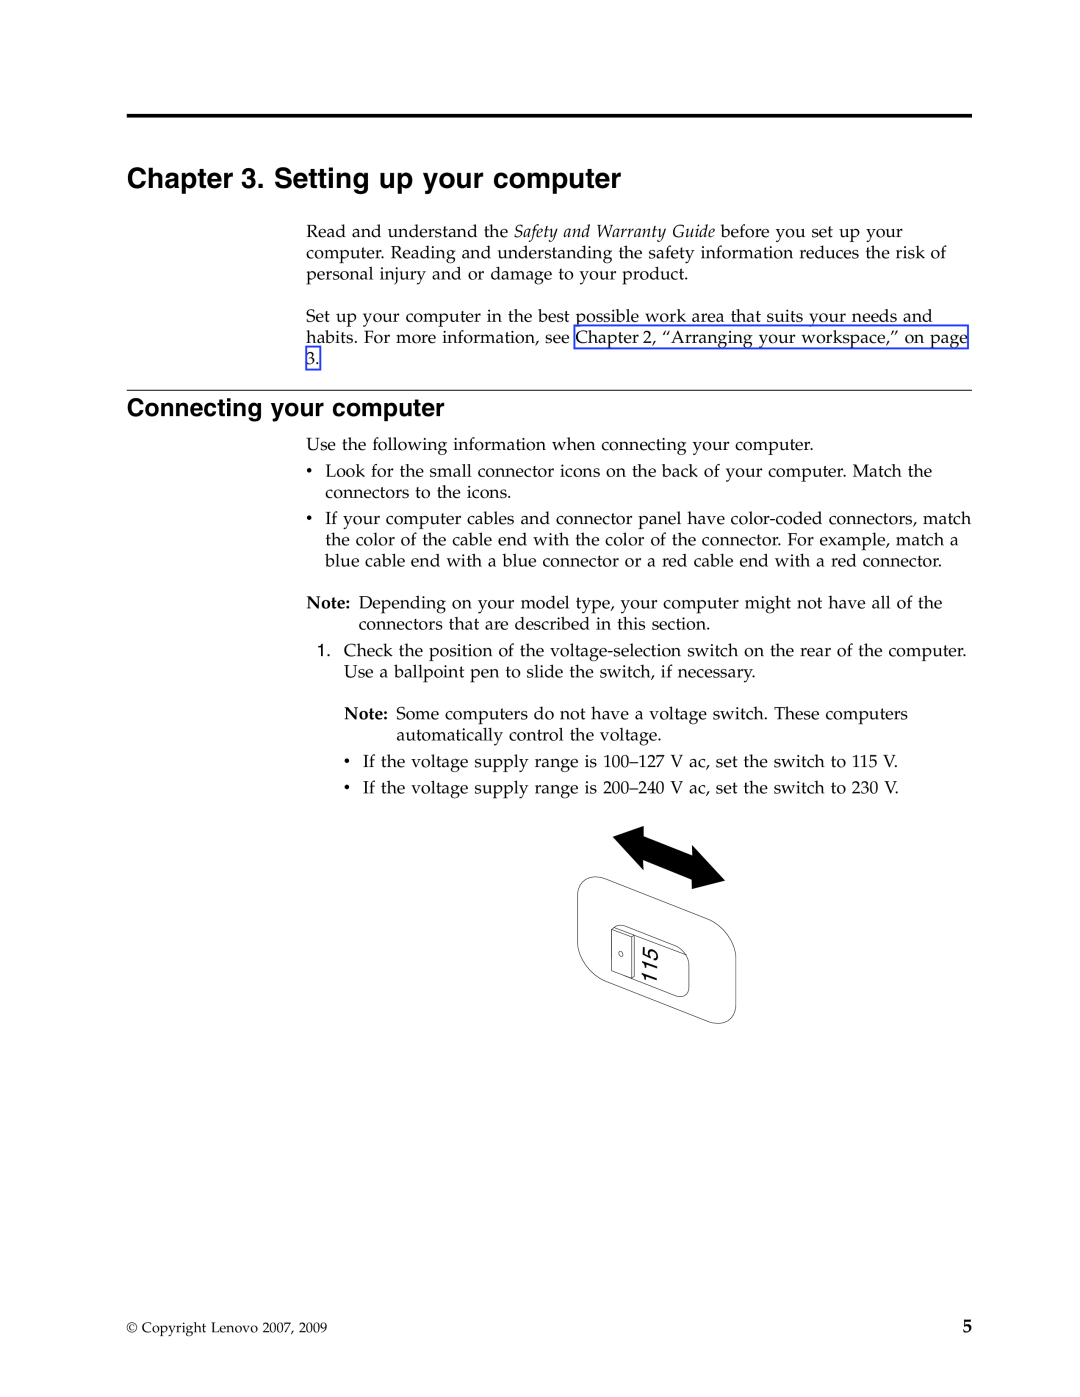 Lenovo 6019 manual Setting up your computer, Connecting your computer 